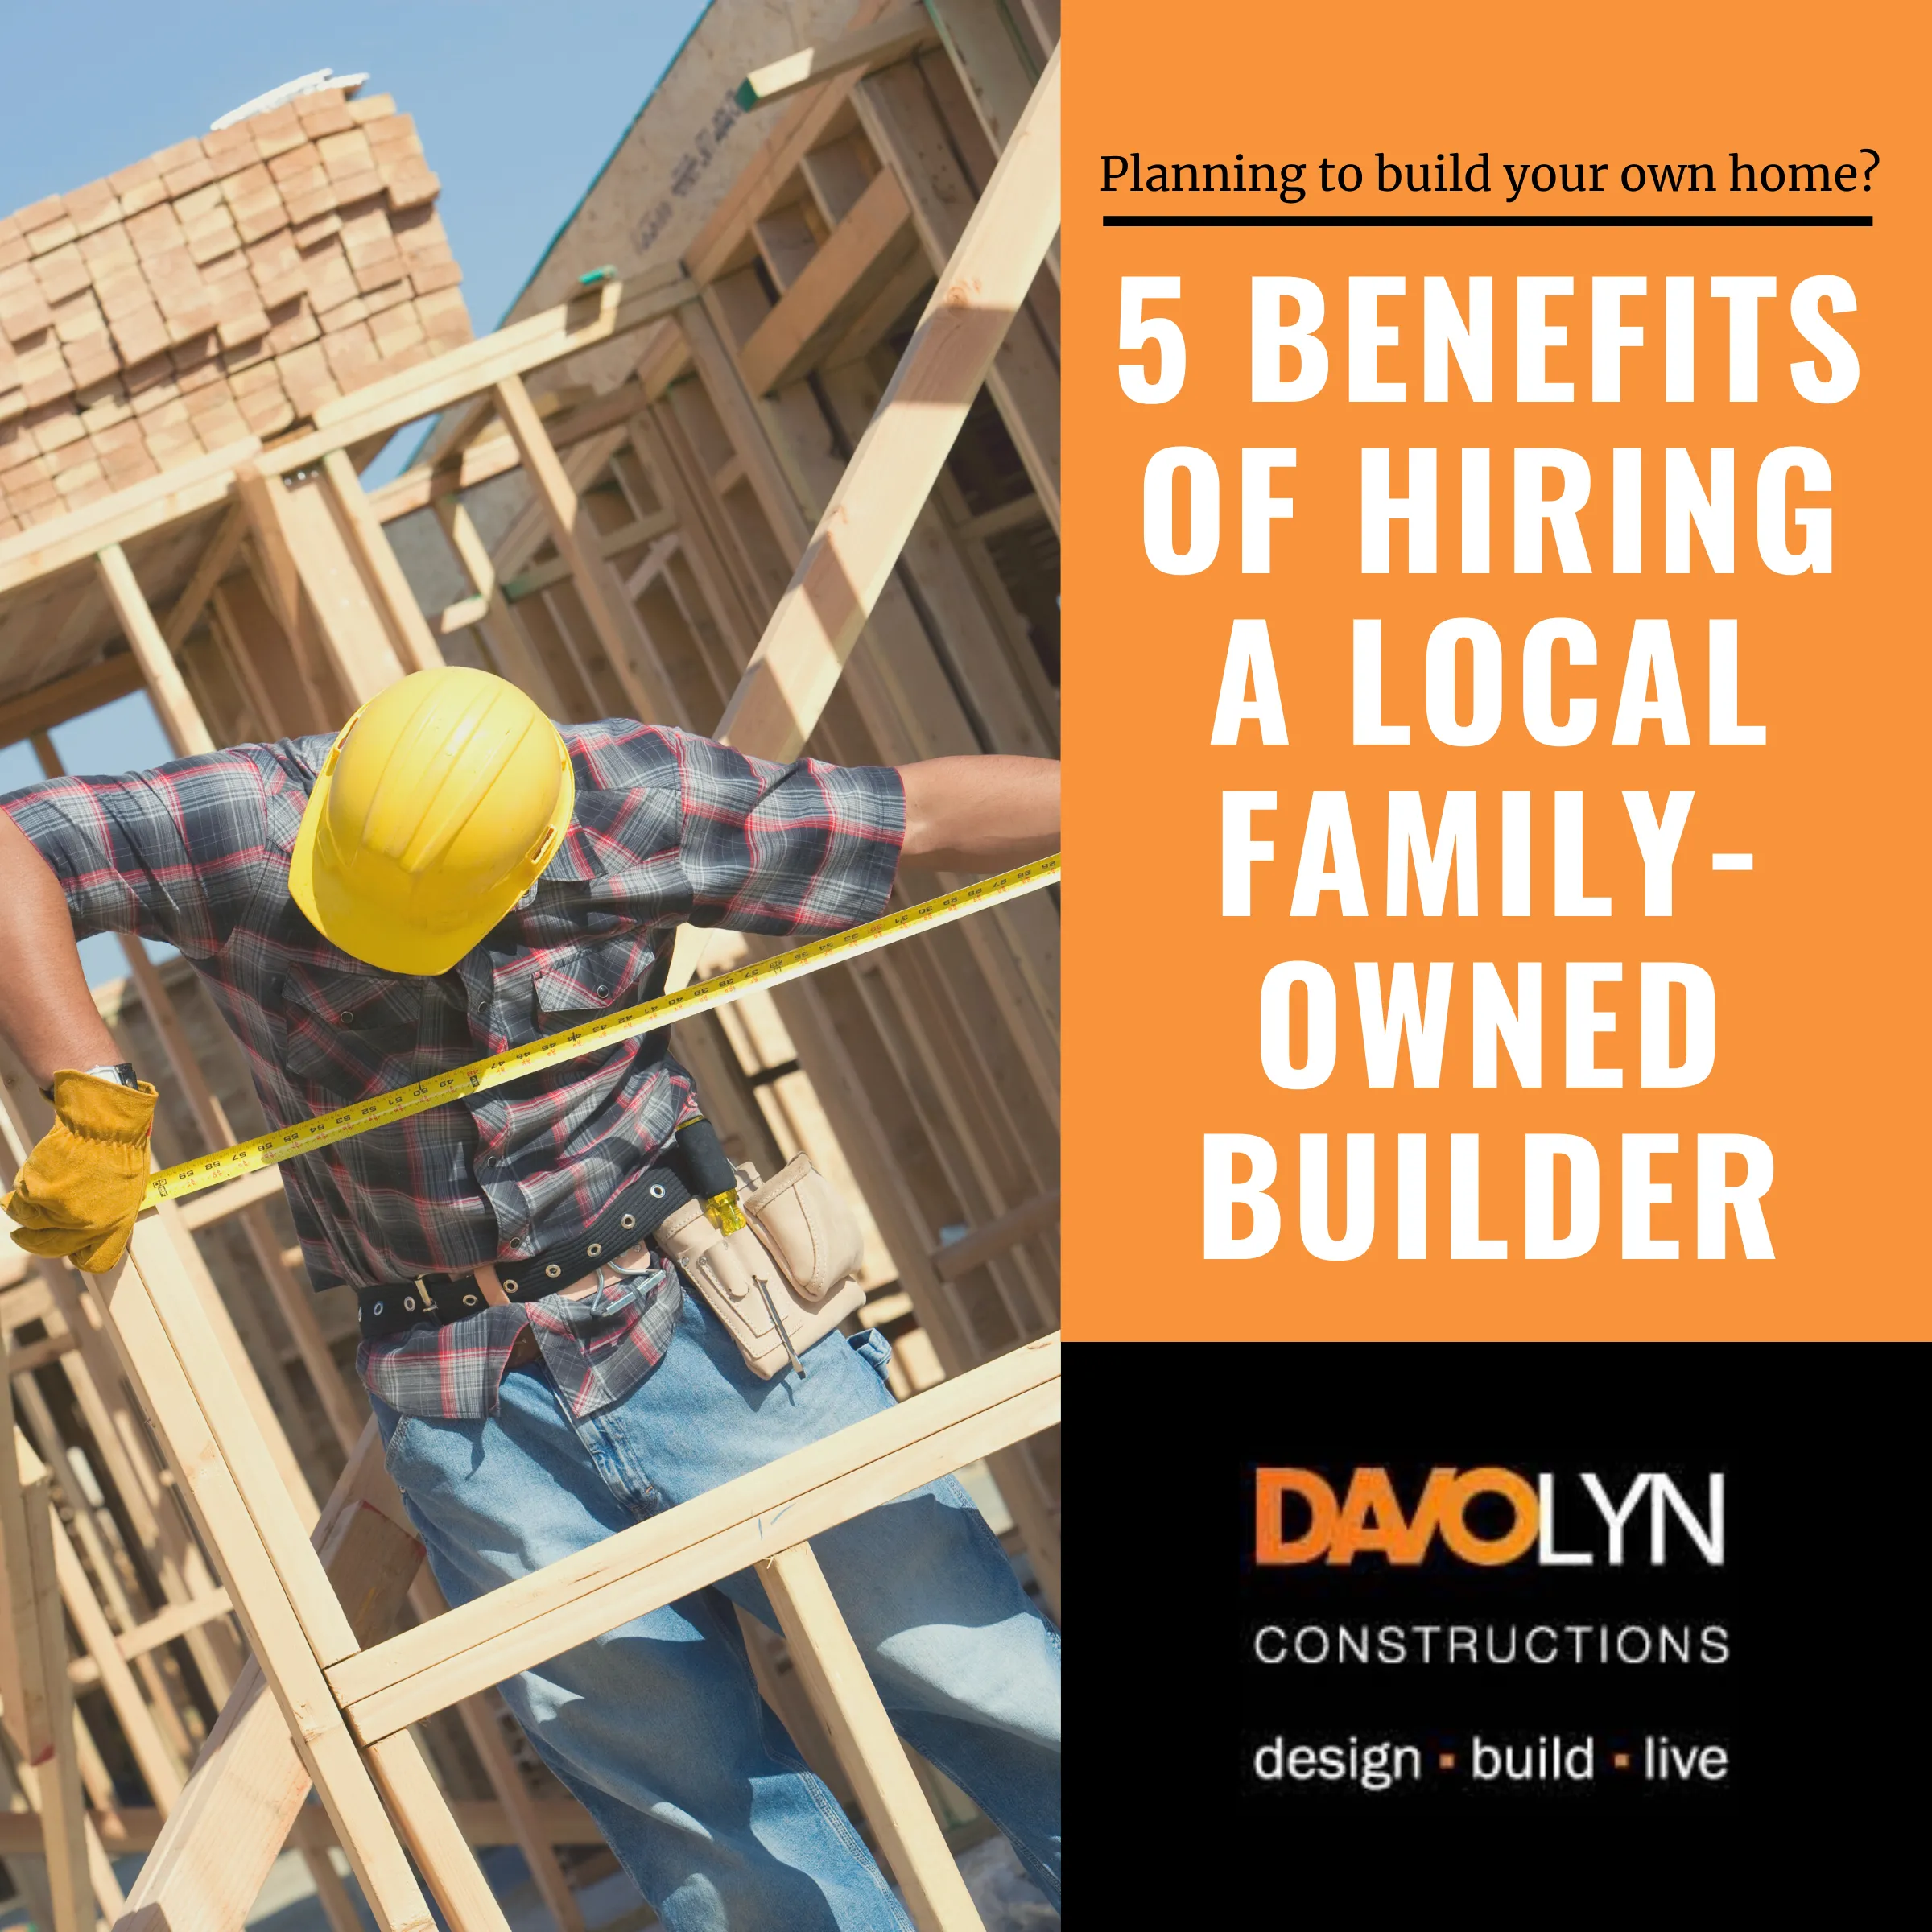 5 Benefits of Hiring a Local Family-Owned Builder